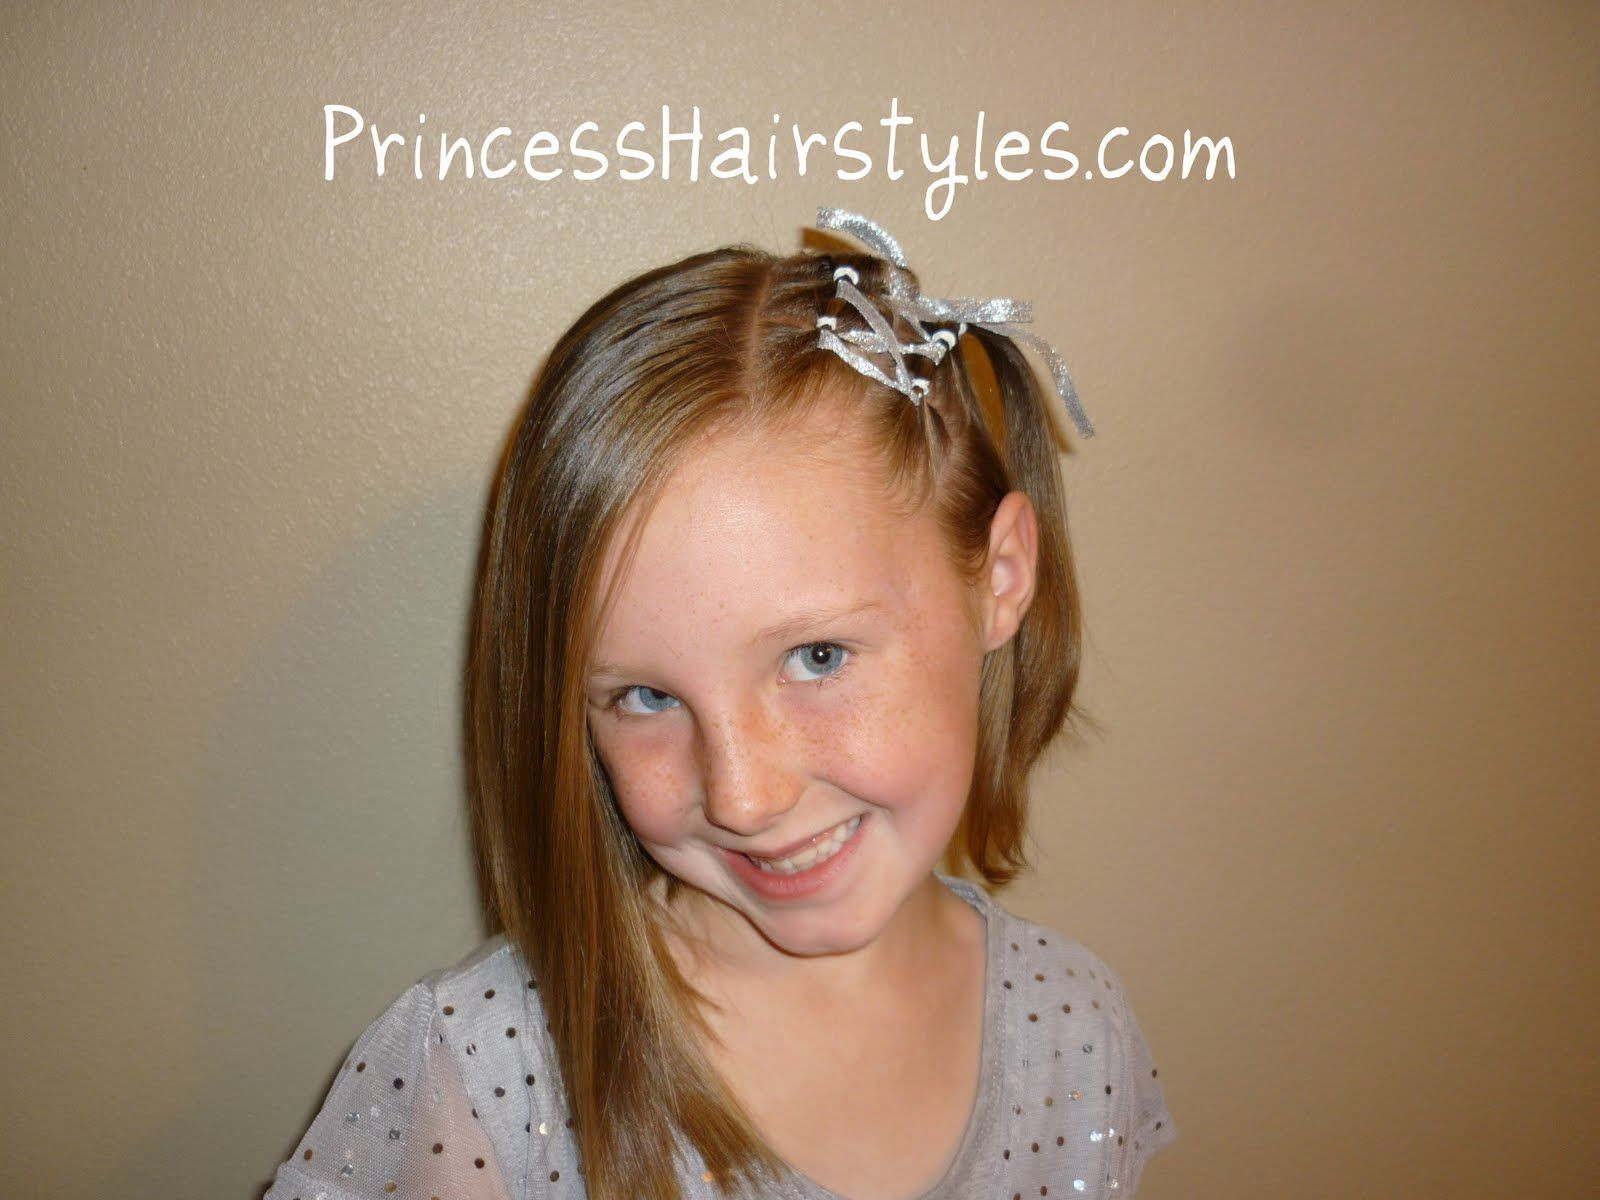 Hairstyles For 12 Year Olds Girls
 TOP 10 hairstyles for 12 year old girls